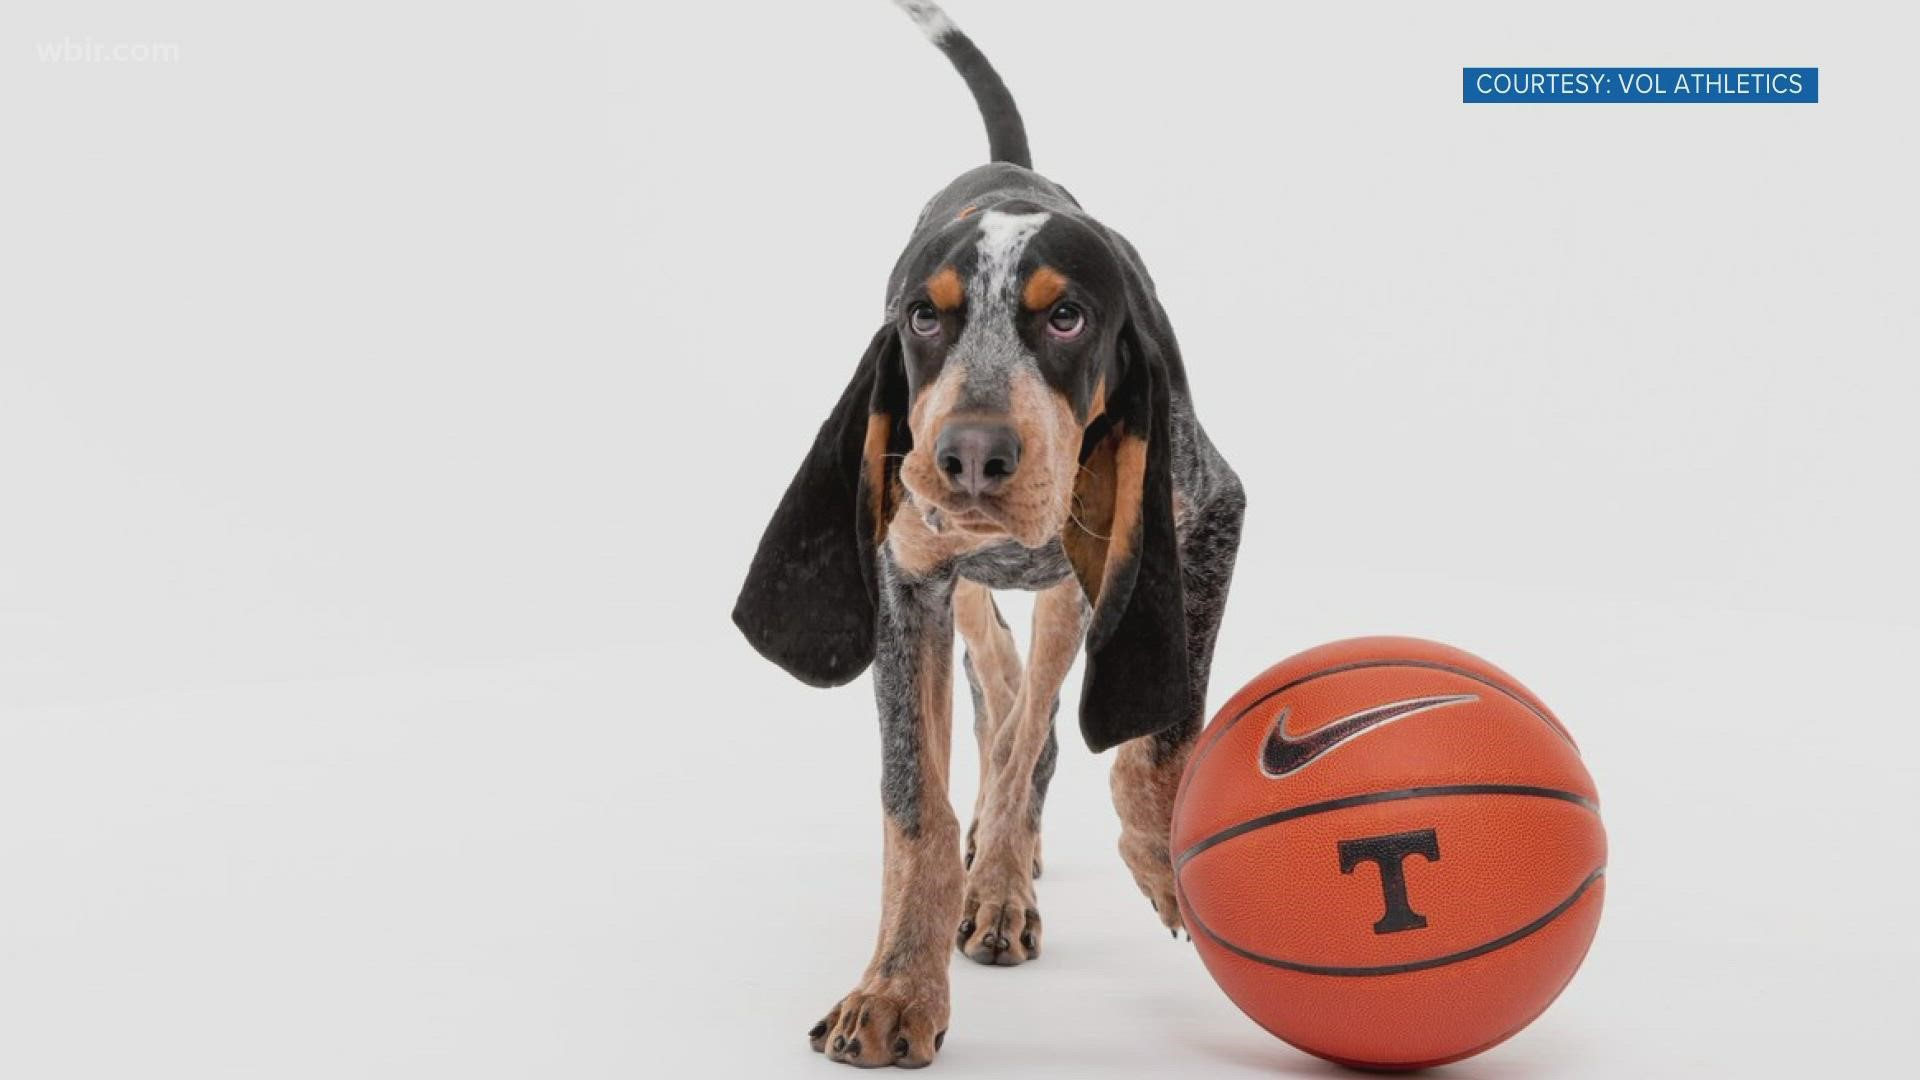 Prepare your hearts, VFLs. A new floppy-eared friend is coming to the University of Tennessee next fall, and his name is Smokey XI.